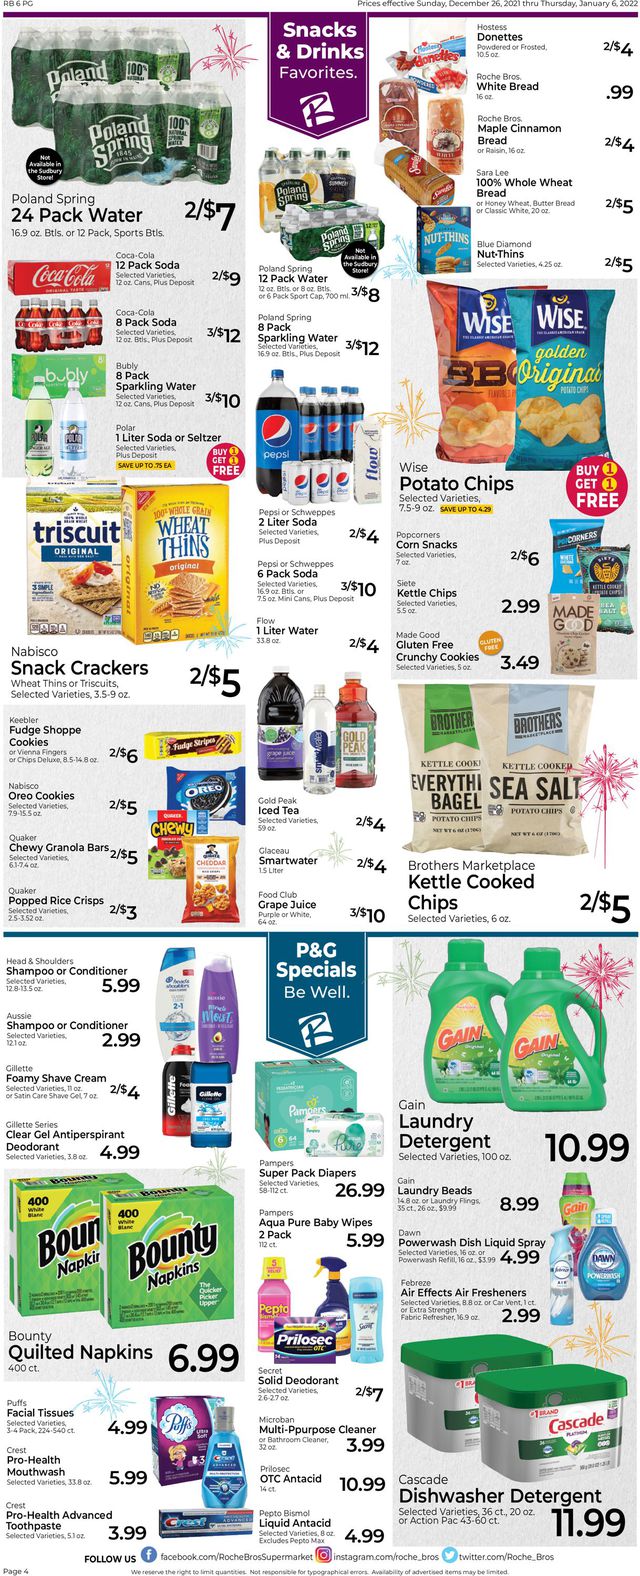 Roche Bros. Supermarkets Ad from 12/26/2021